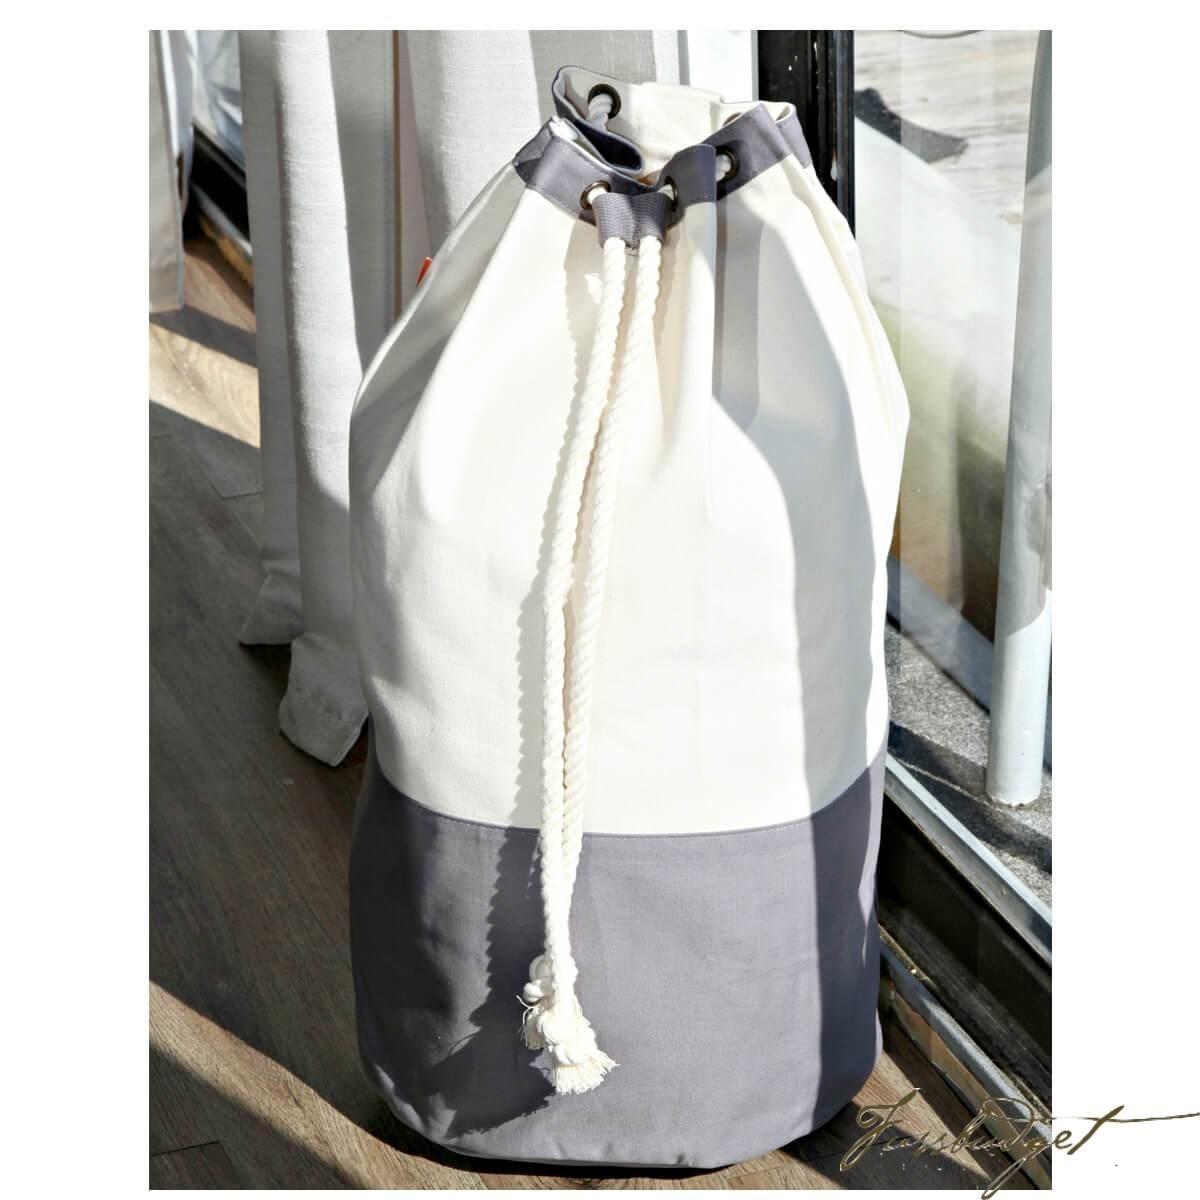  Personalized Laundry Bag Duffle Bag Large Spacious 22”X28”  Drawstring 100% Sturdy Cotton Canvas with Strap for College Students Dorm  Room Clothes Hamper Storage Washer